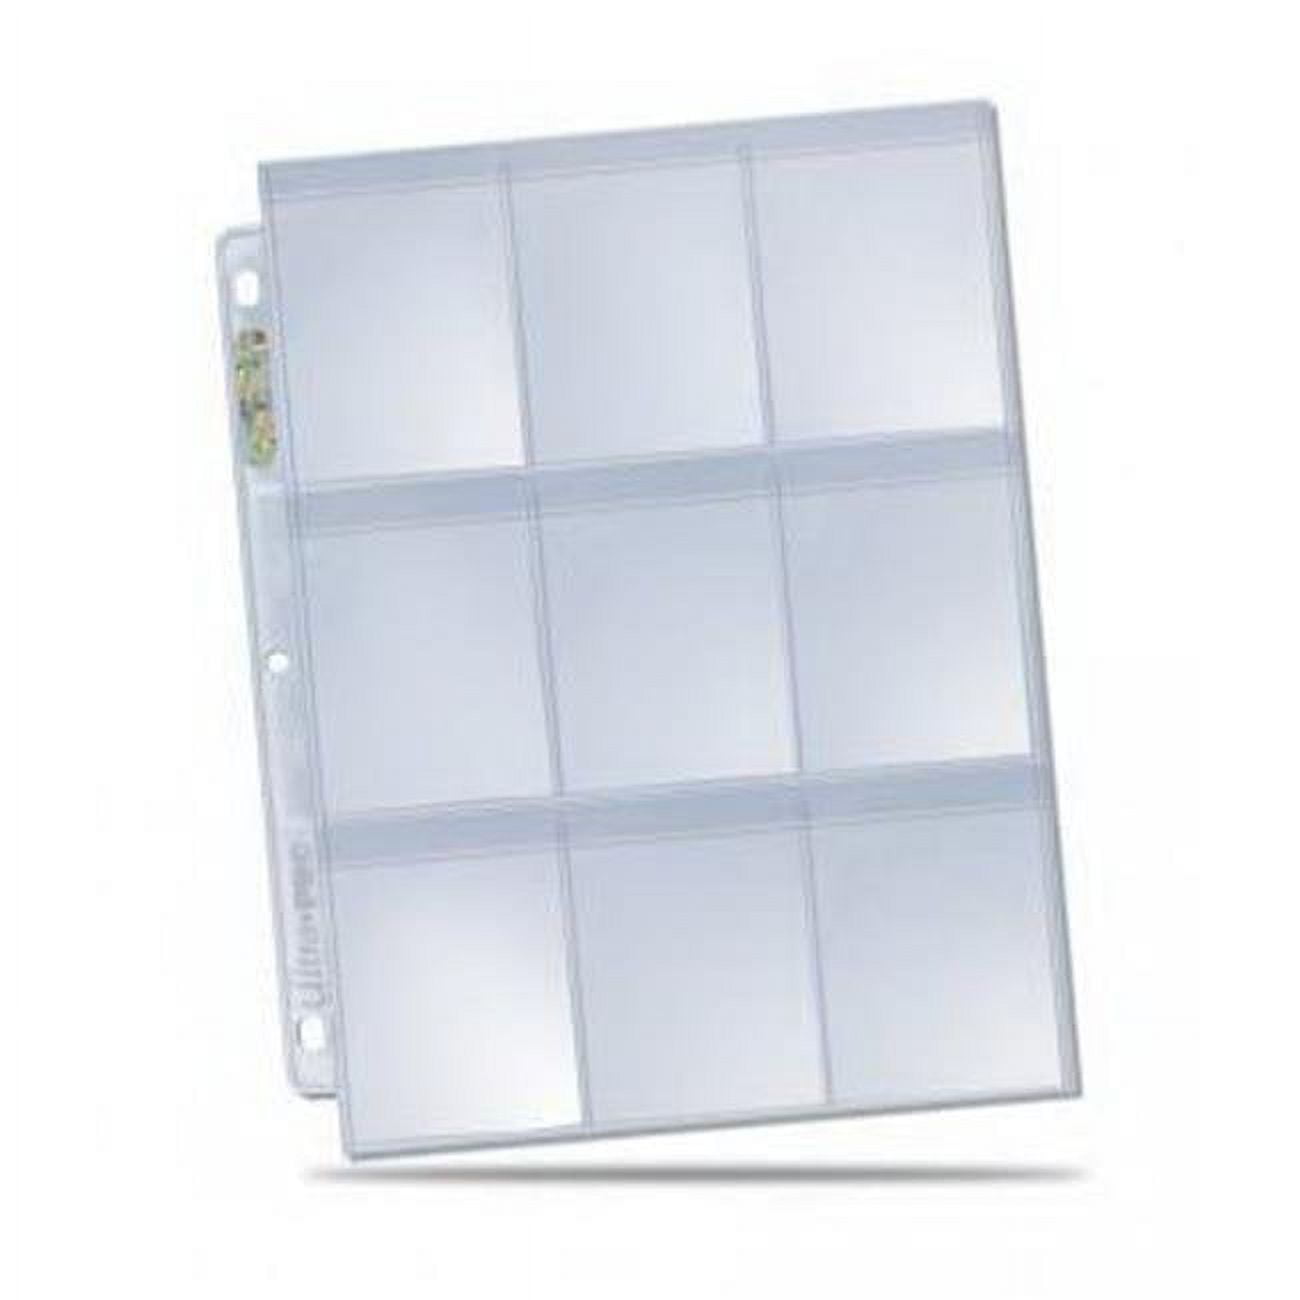 9-pocket Secure Pages (100ct)